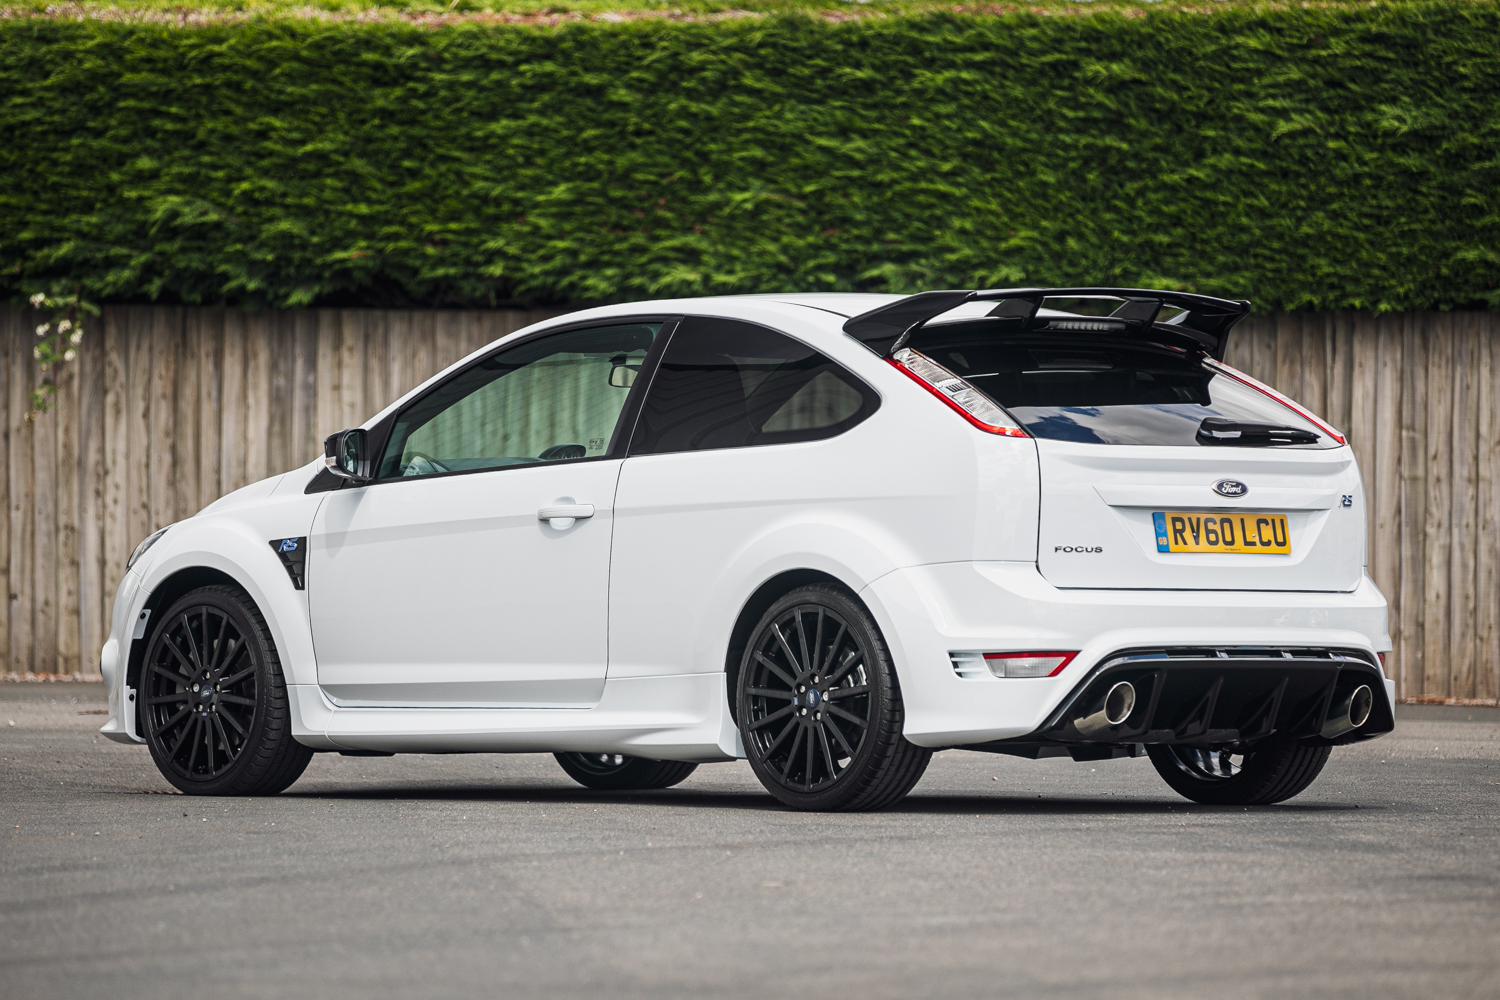 2010 Ford Focus RS - Image 3 of 5